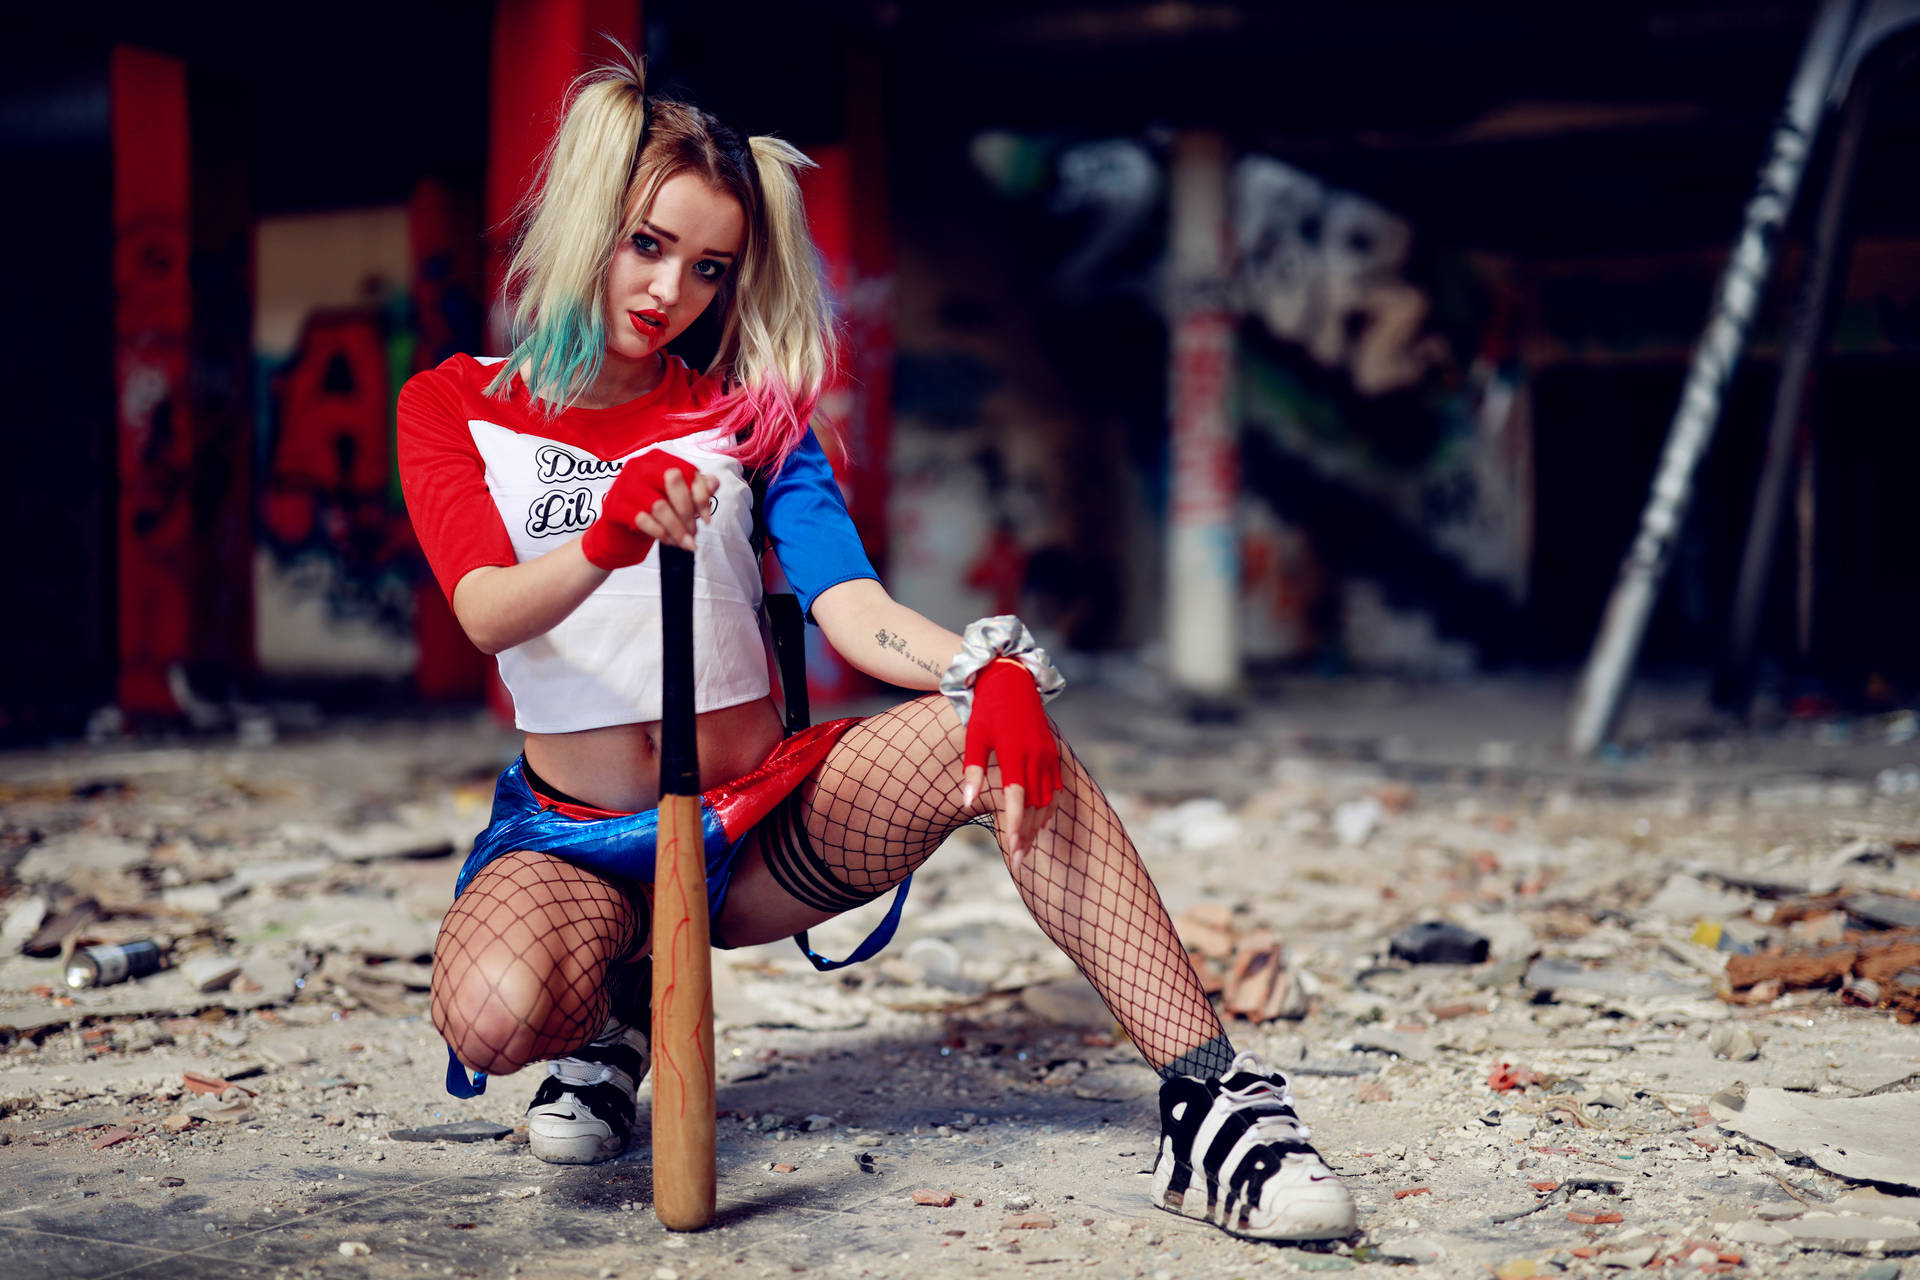 Harley Quinn 6720X4480 Wallpaper and Background Image